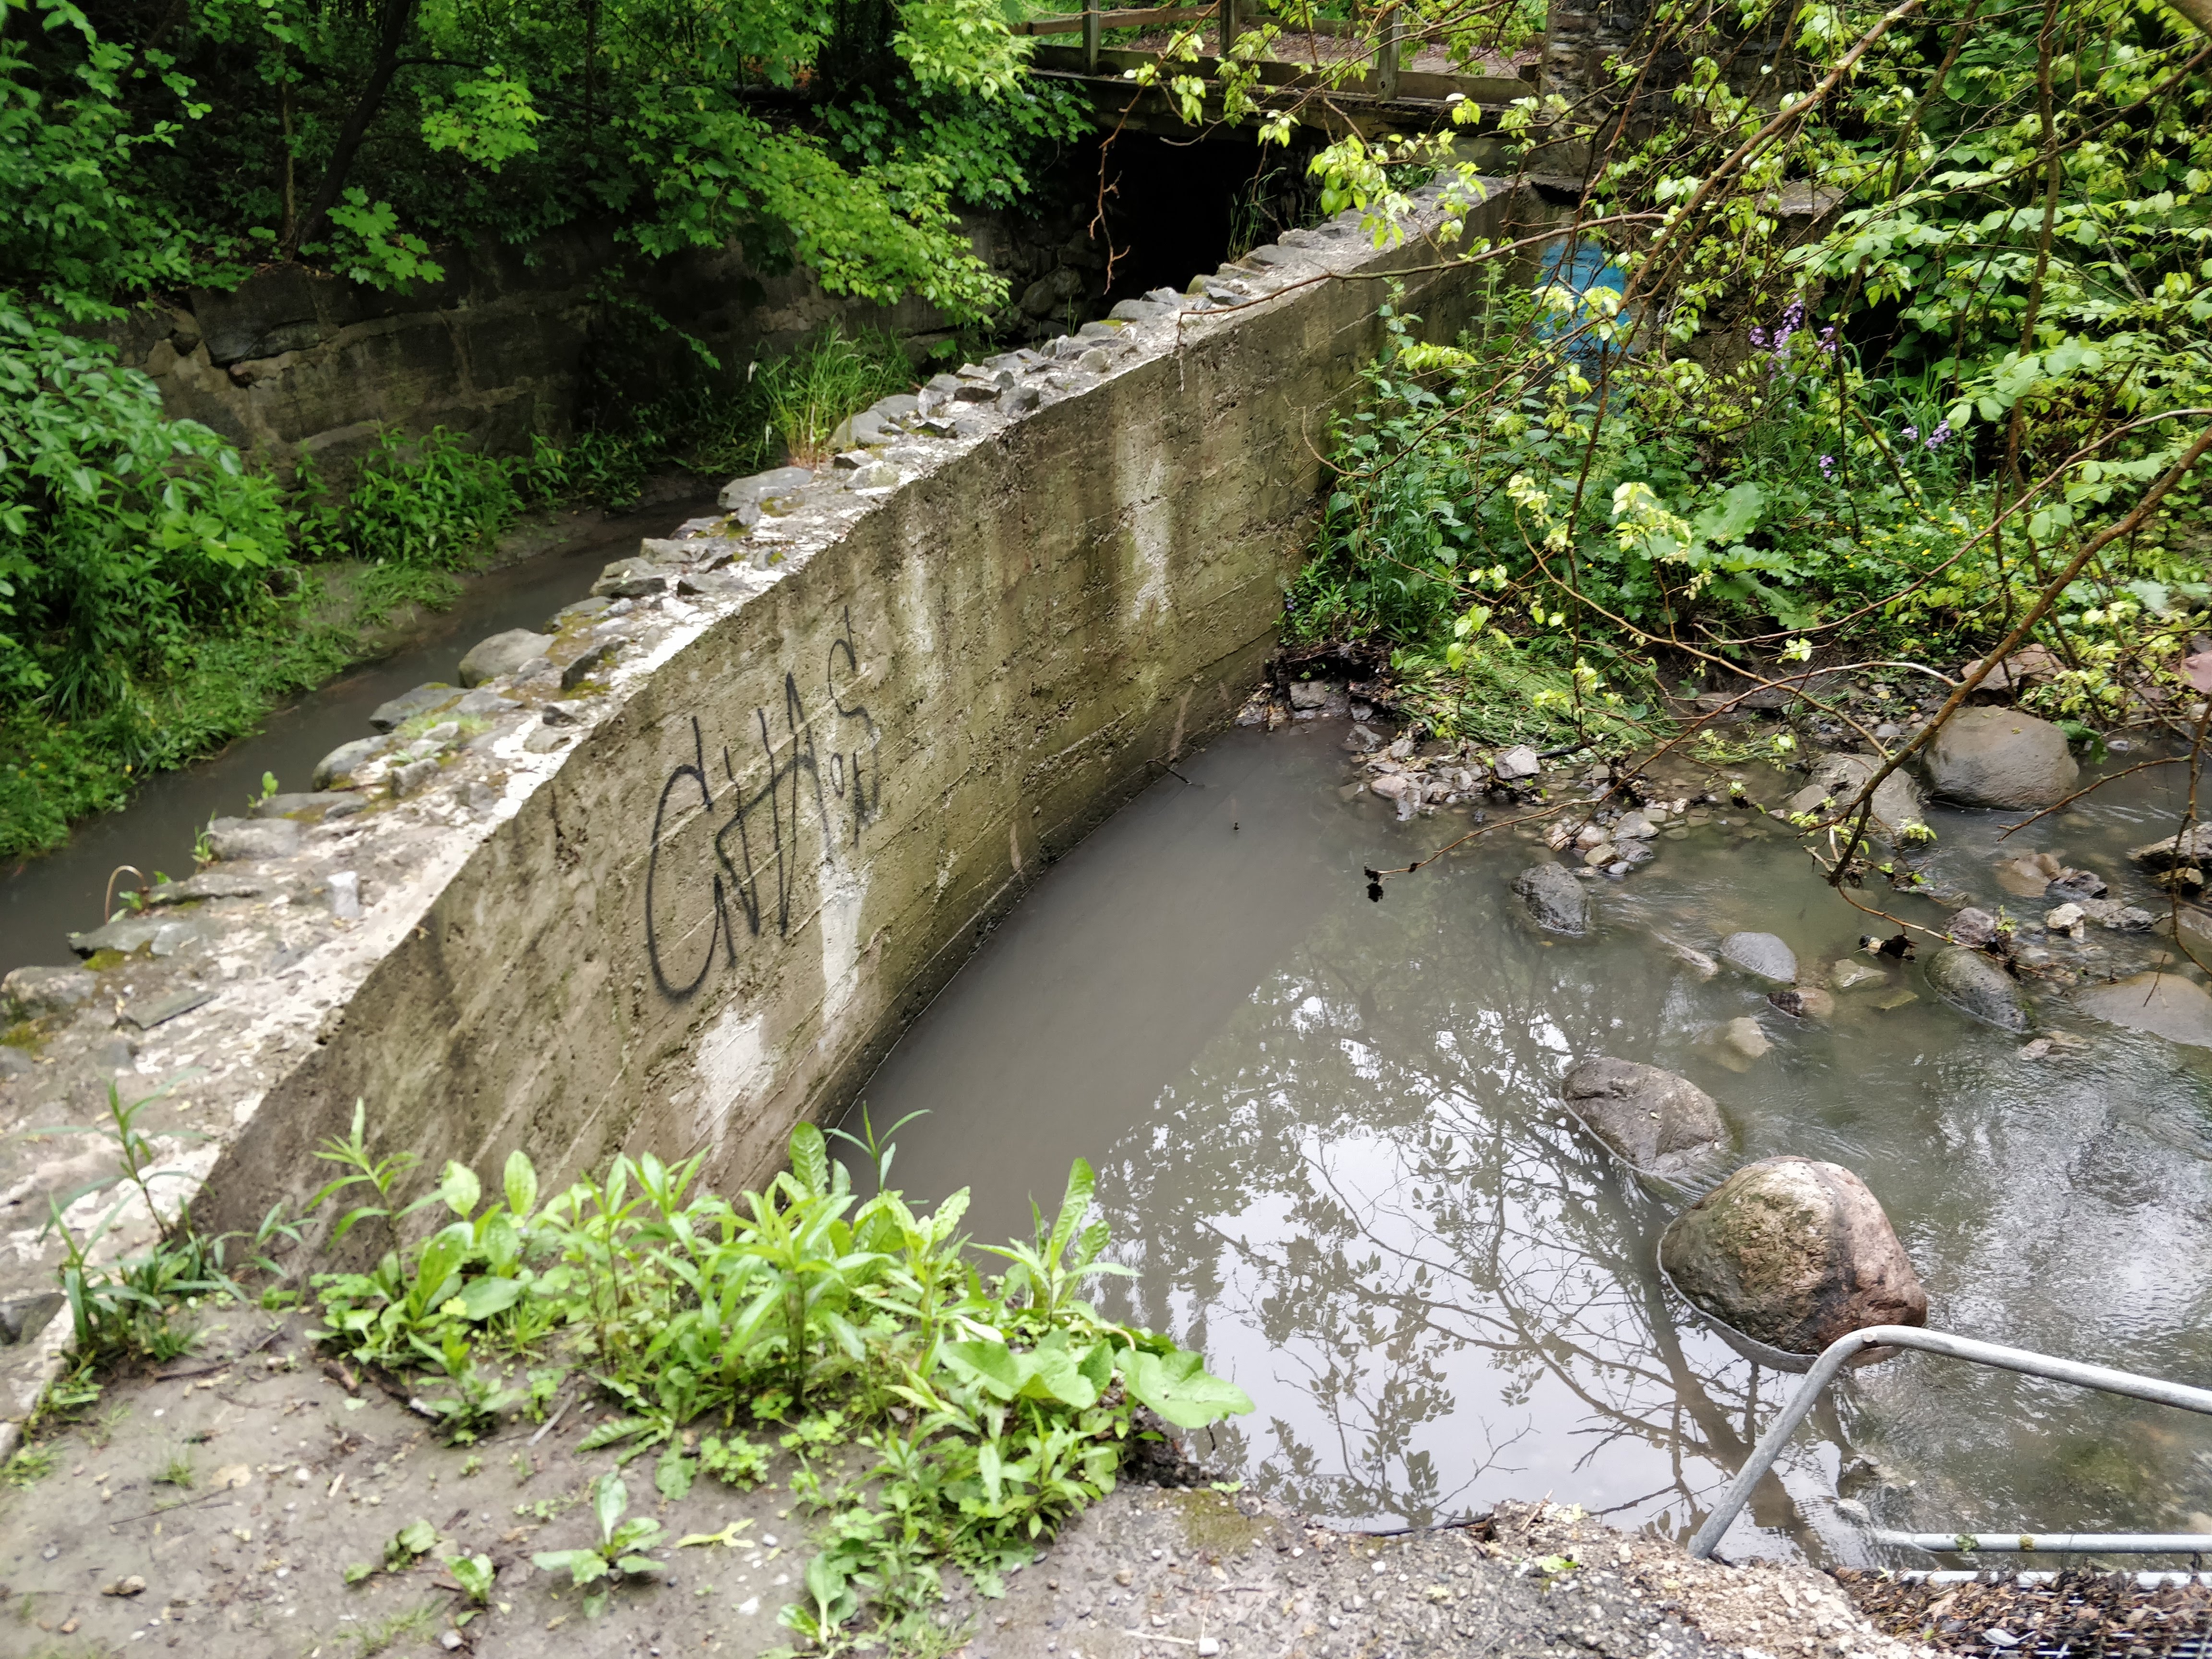 An exposed stone and mortar retaining wall located along Yellow Creek below Summerhill Gardens. Source: TRCA, 2019